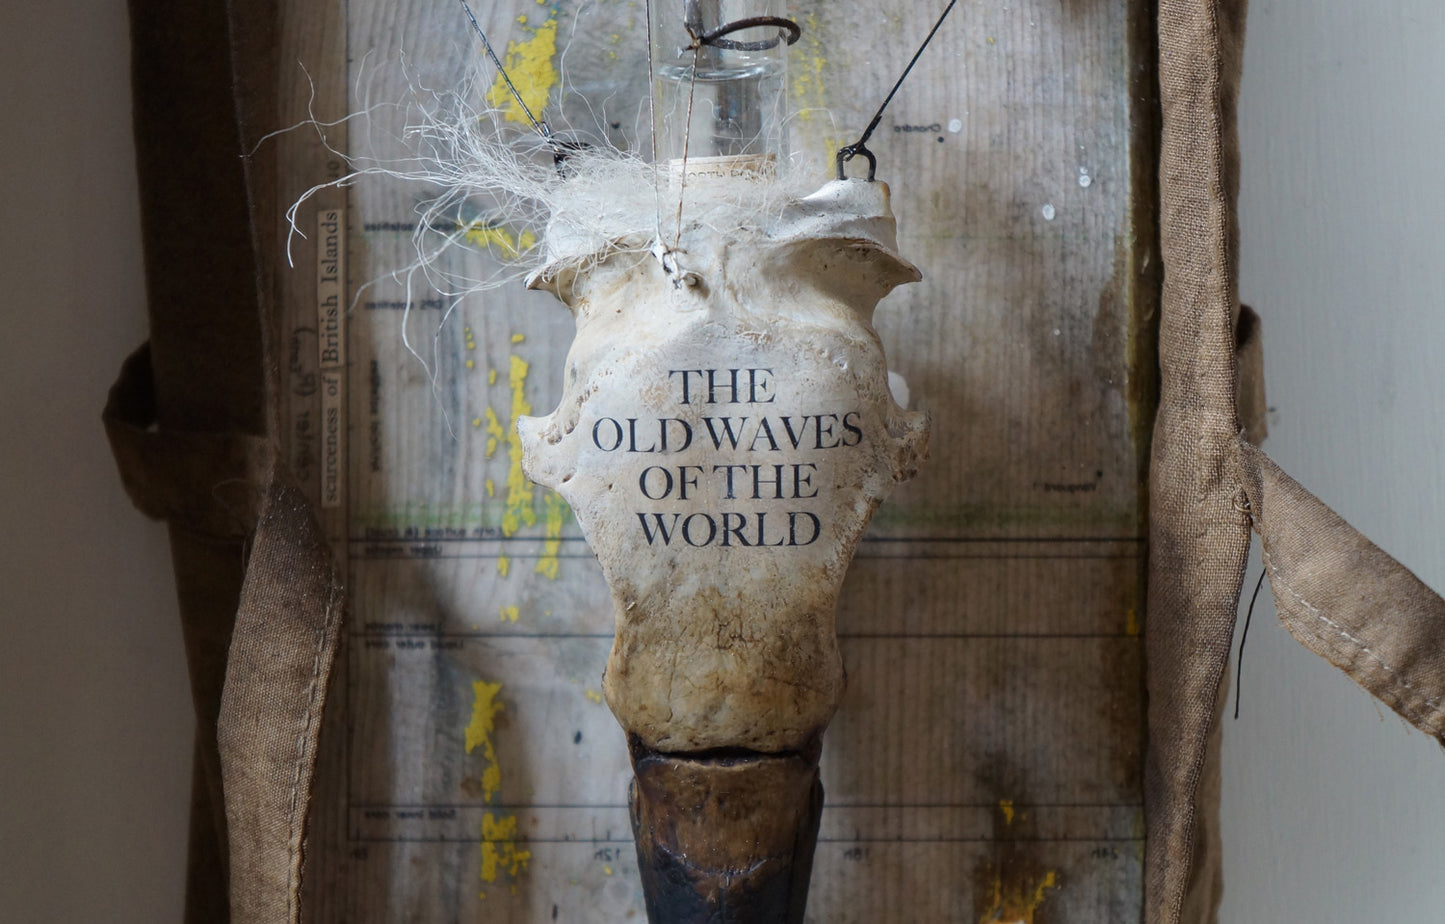 The Old Waves of the World